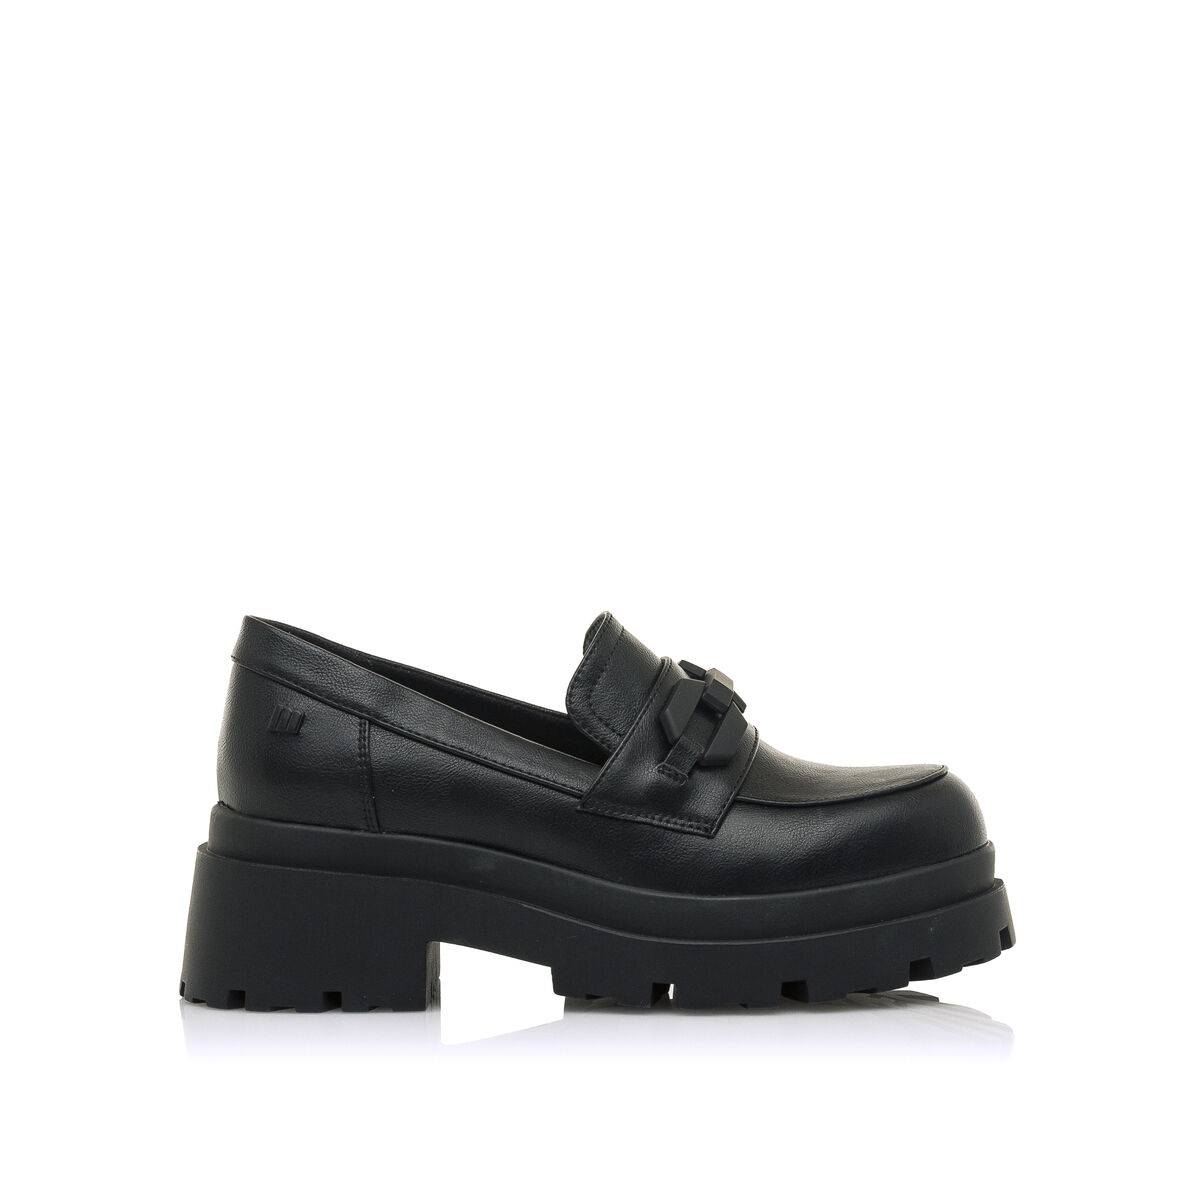 MTNG BLACK LEATHER LOAFERS